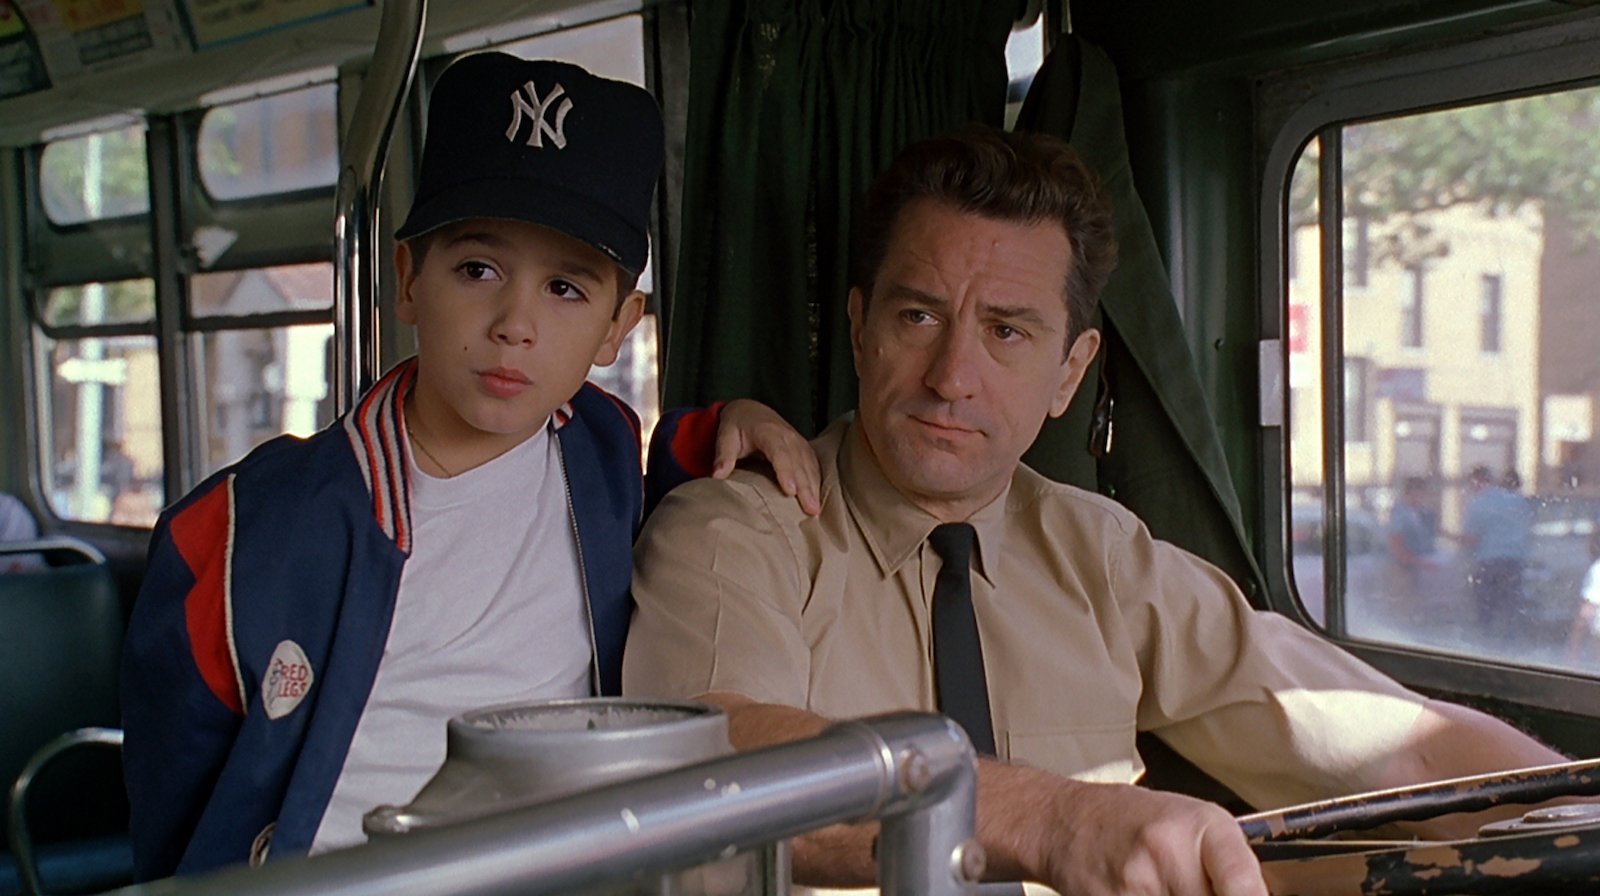 A bus driver in the driver's seat sits next to a young boy in a New York Yankees cap, who stands with his hand on the man's shoulder